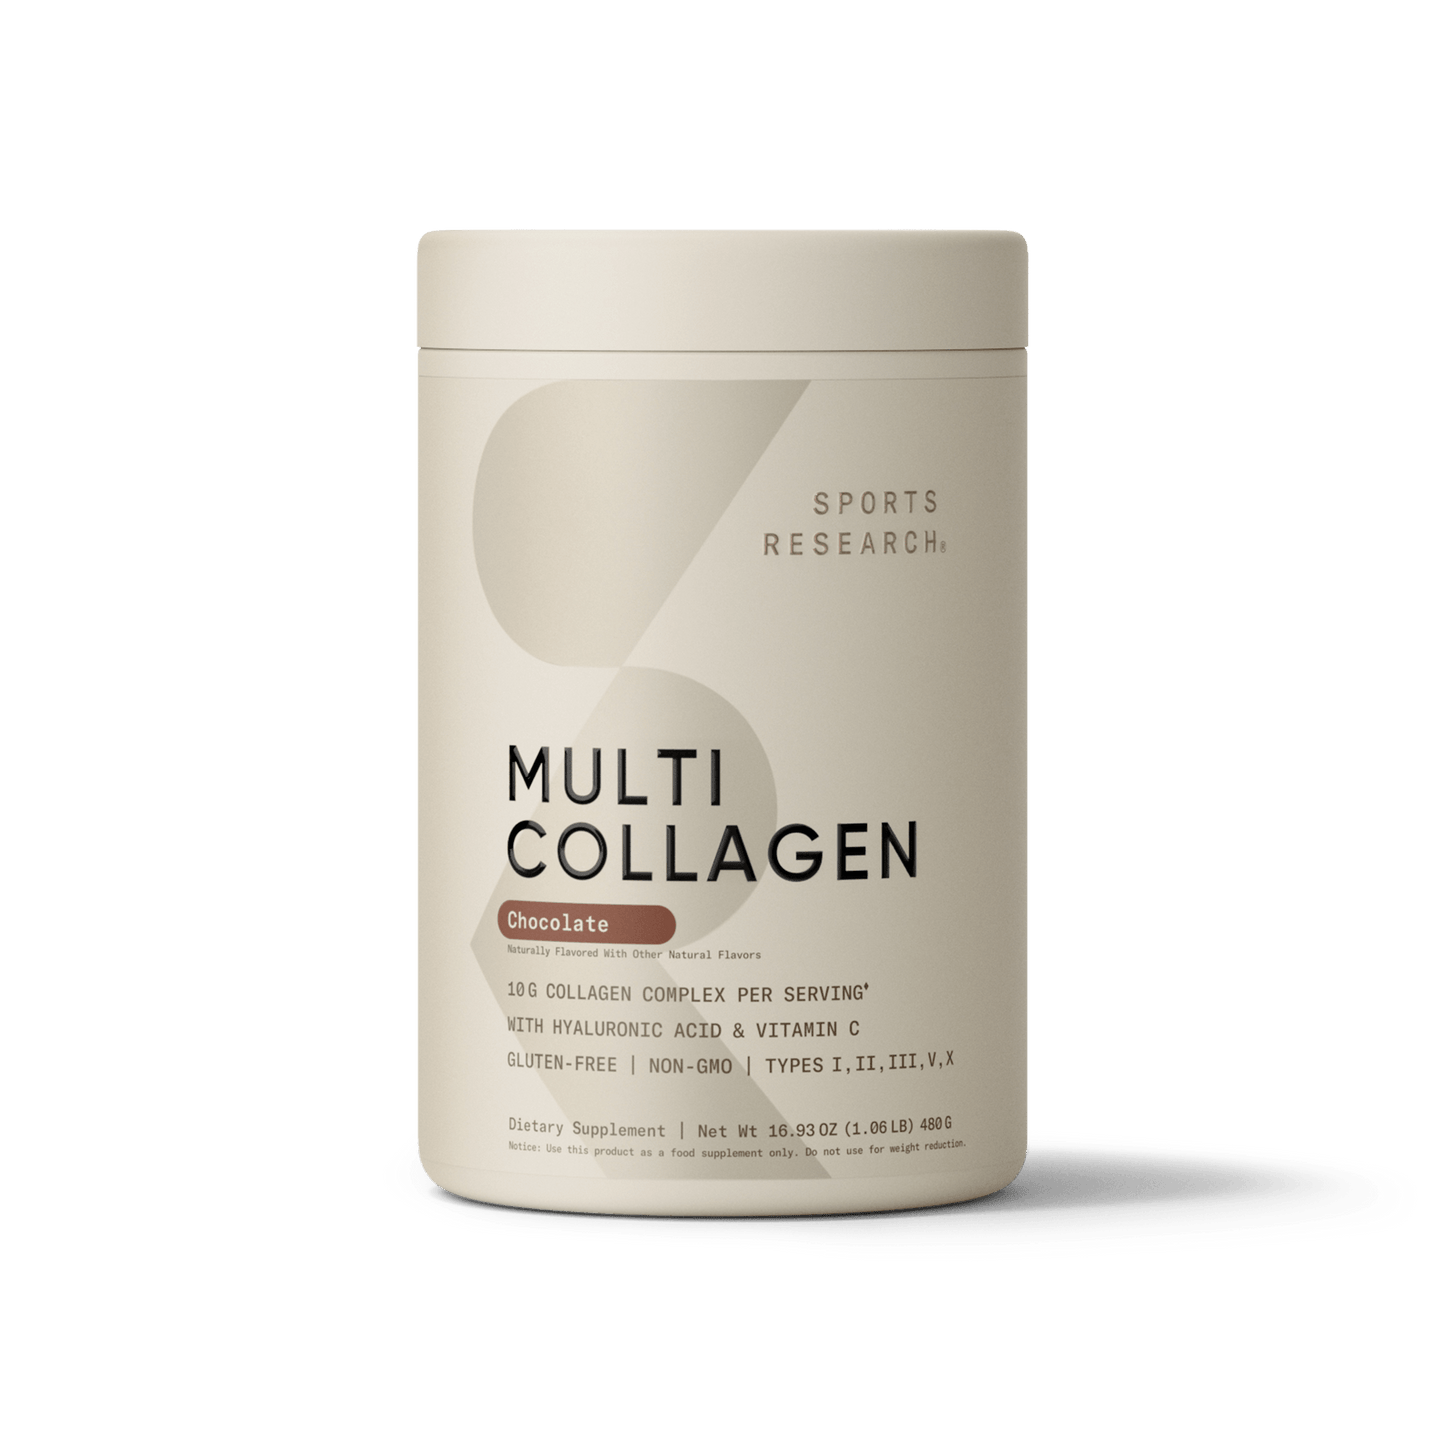 Sports Research Multi Collagen Powder with 5 Types of Collagen in chocolate flavor.